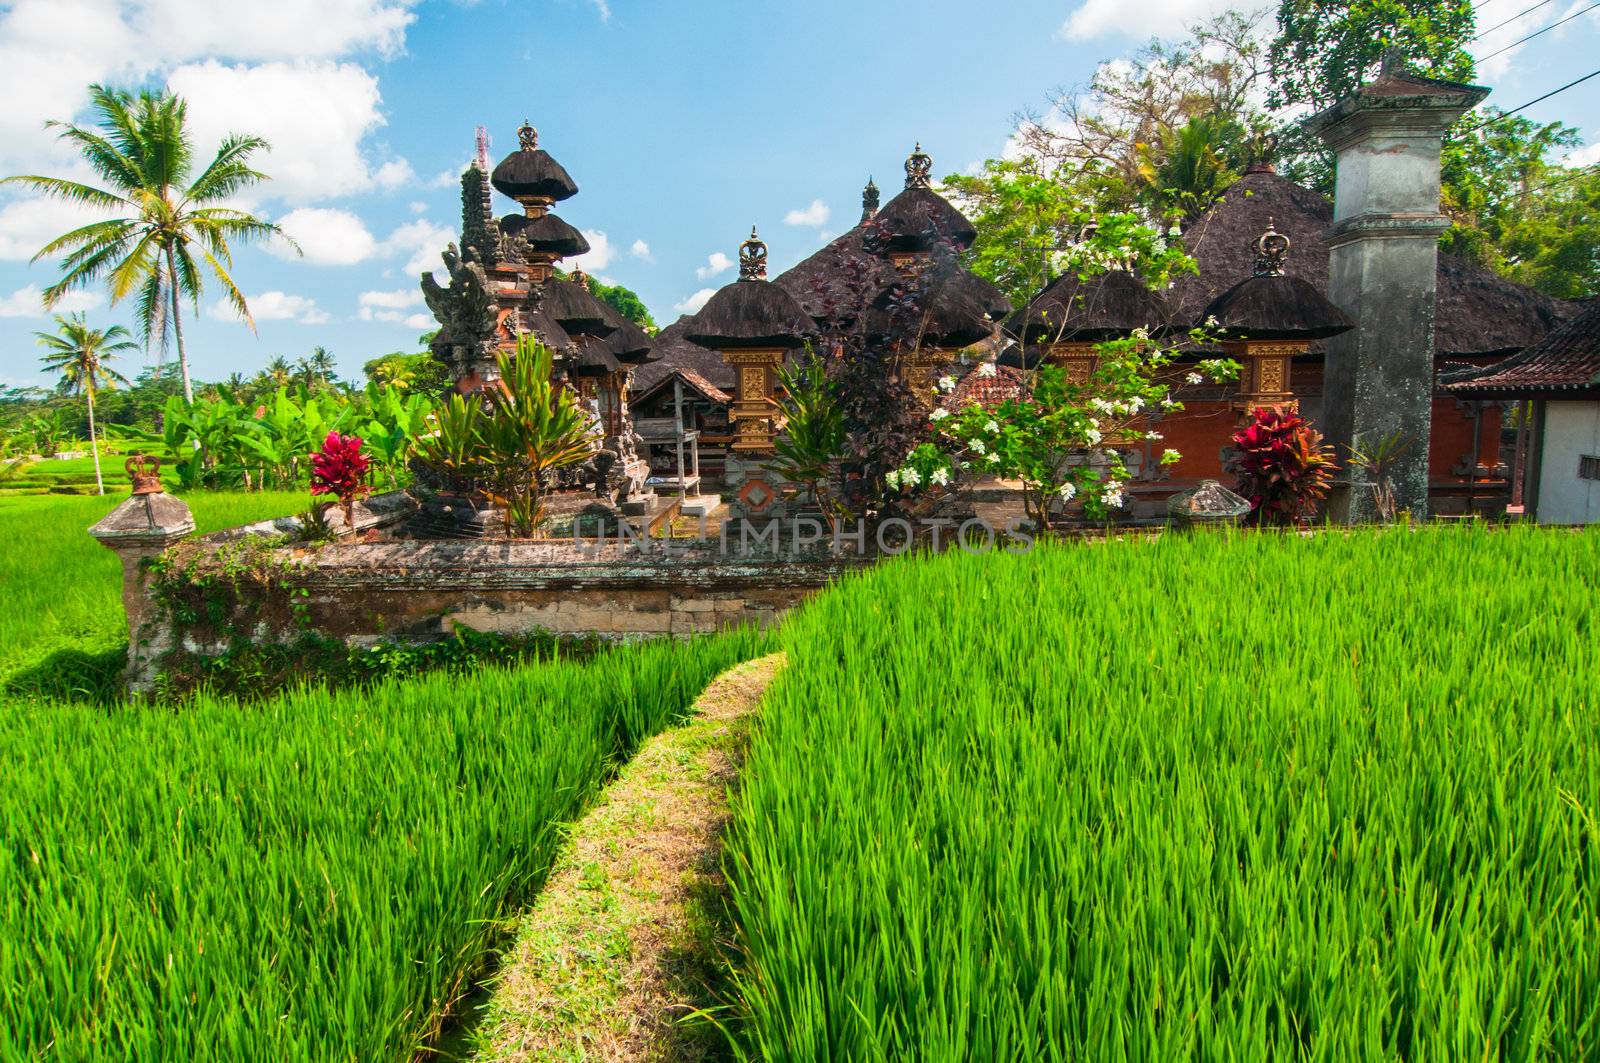 Rice terrace and small temple at background, Bali, Indonesia